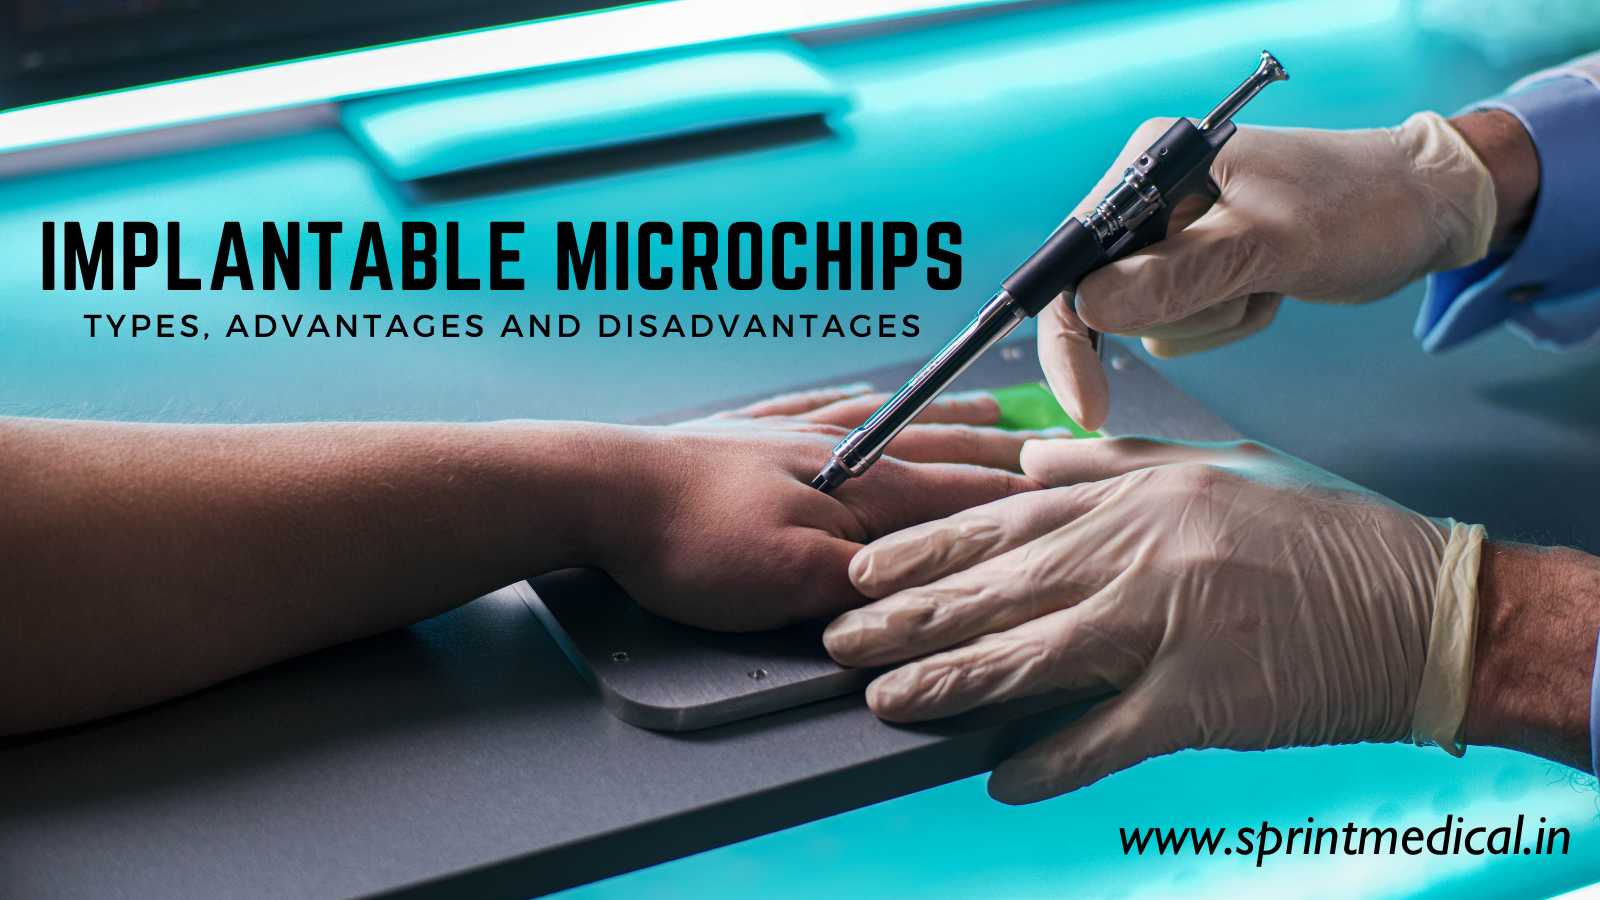 Implantable Microchips Types, Advantages and Disadvantages